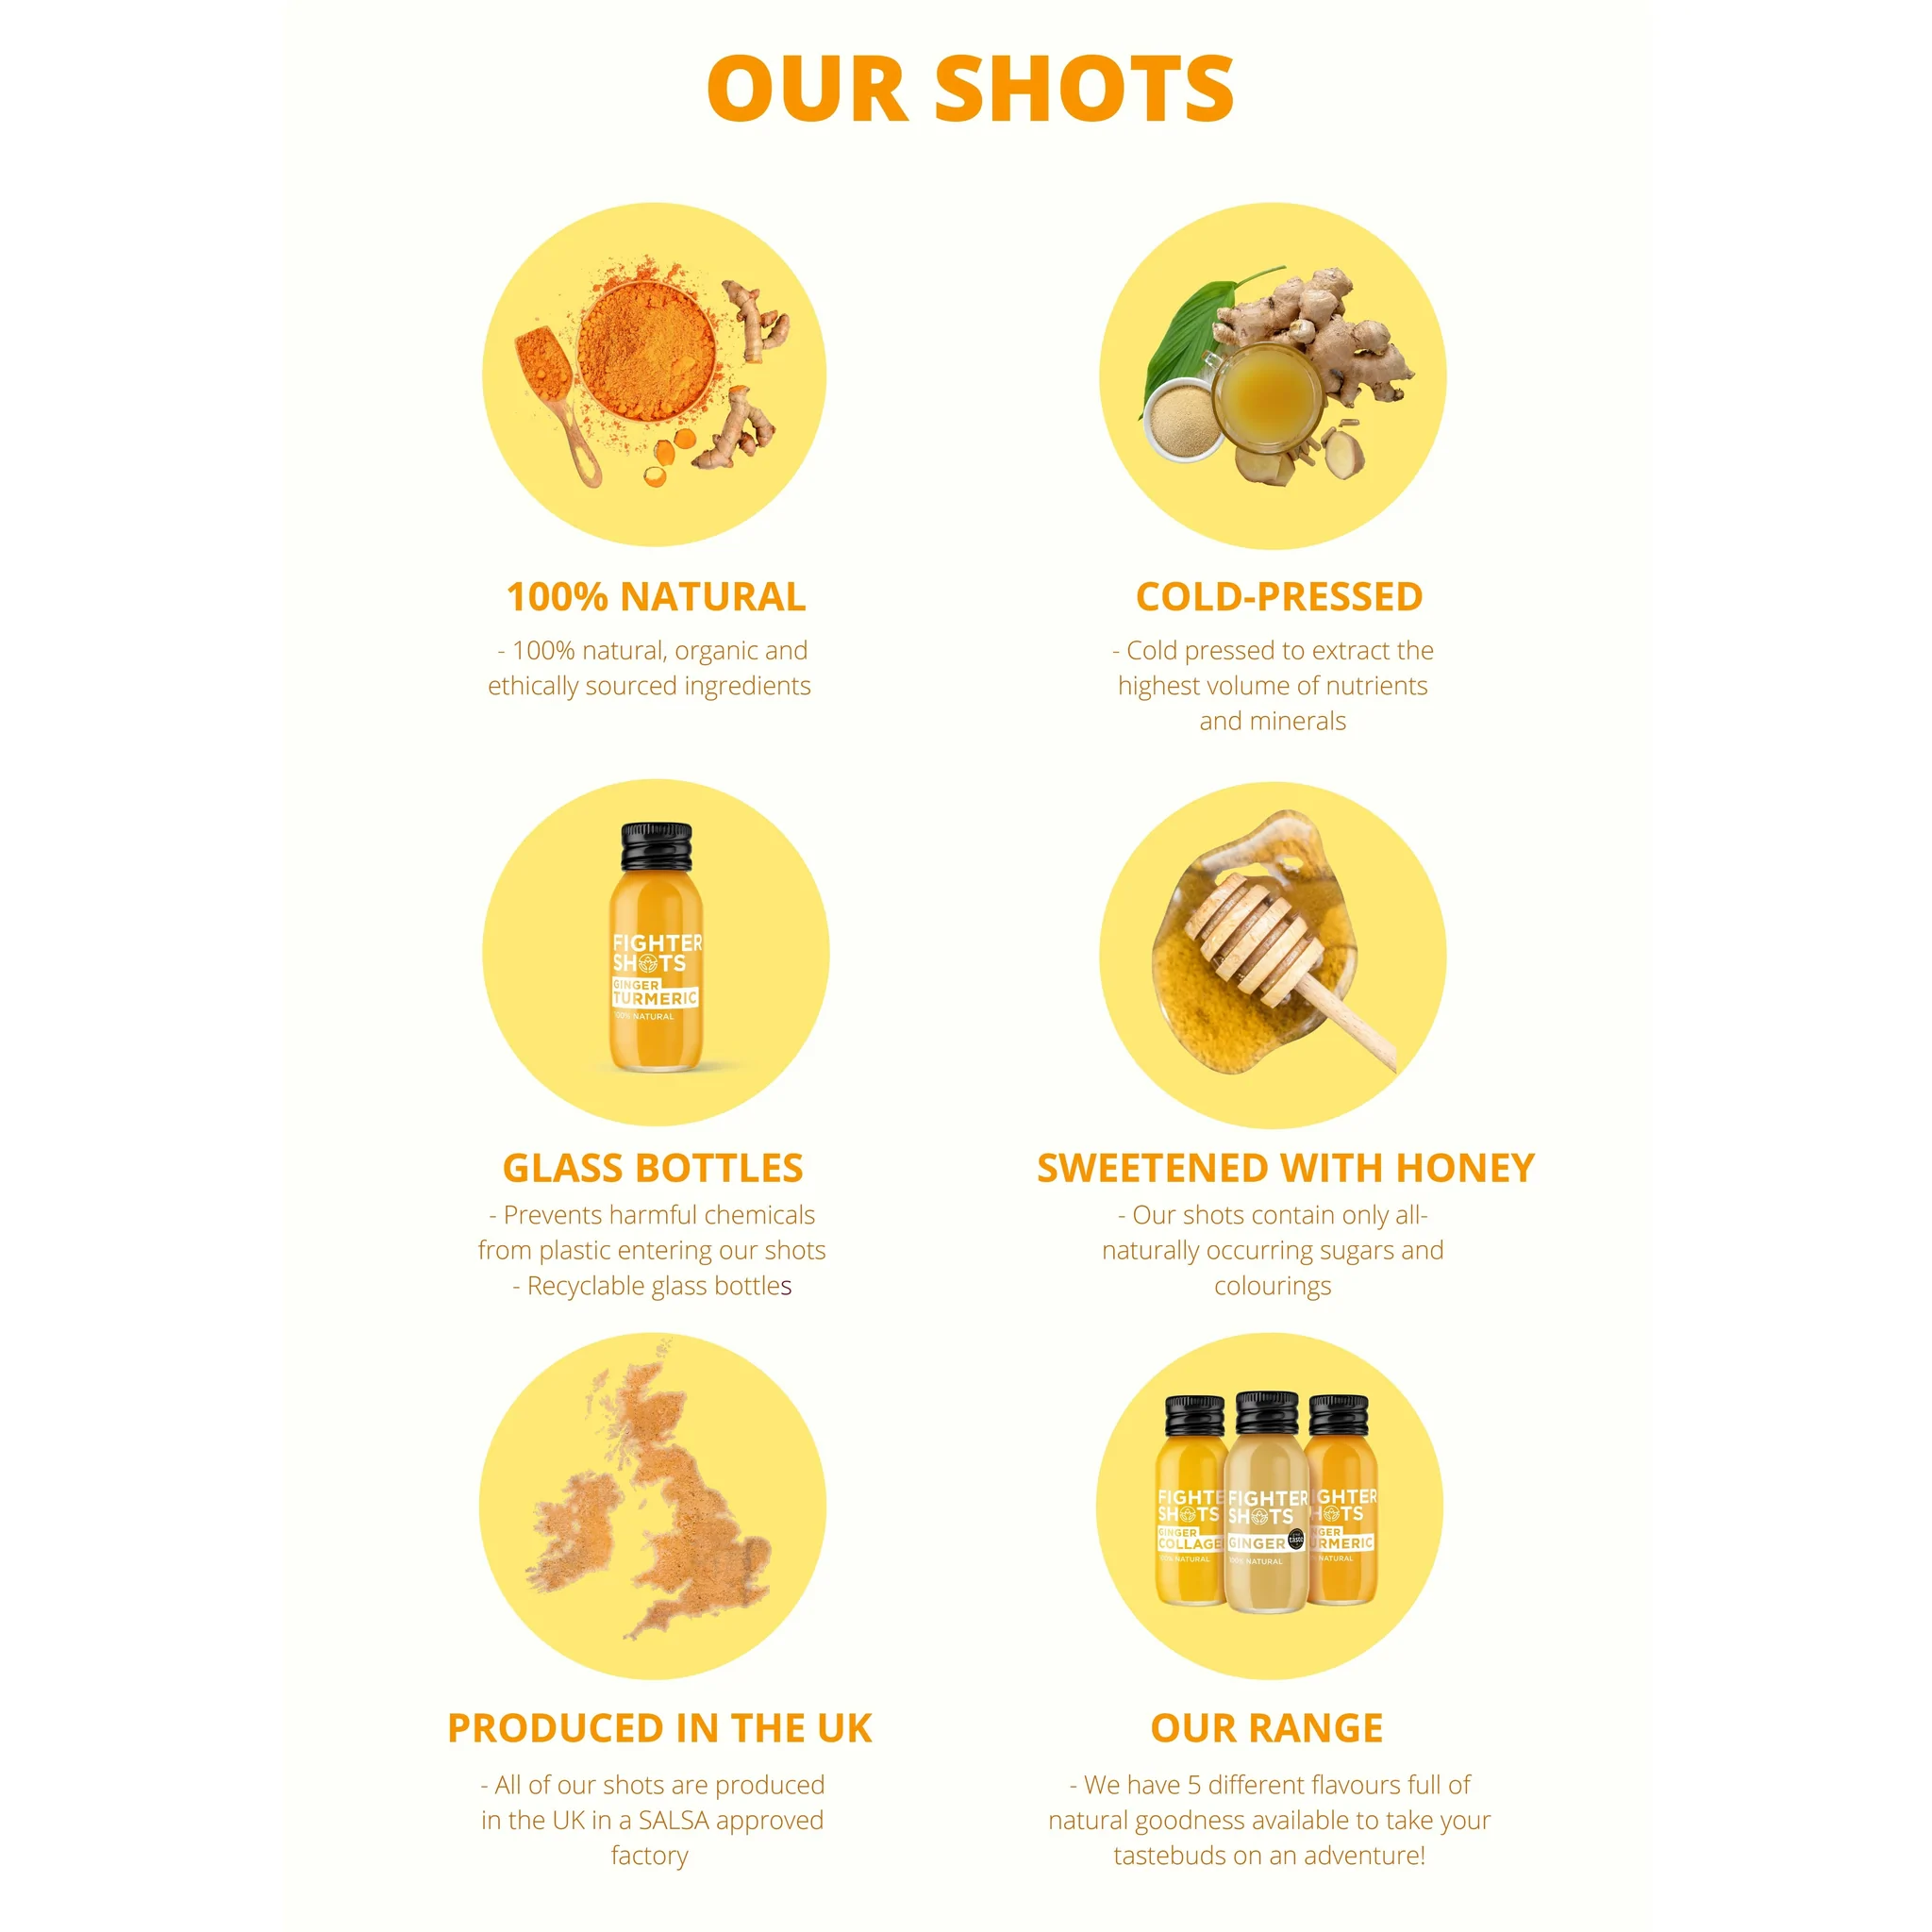 Fighter Shots, All-Natural Health Shots (fightershots) - Profile